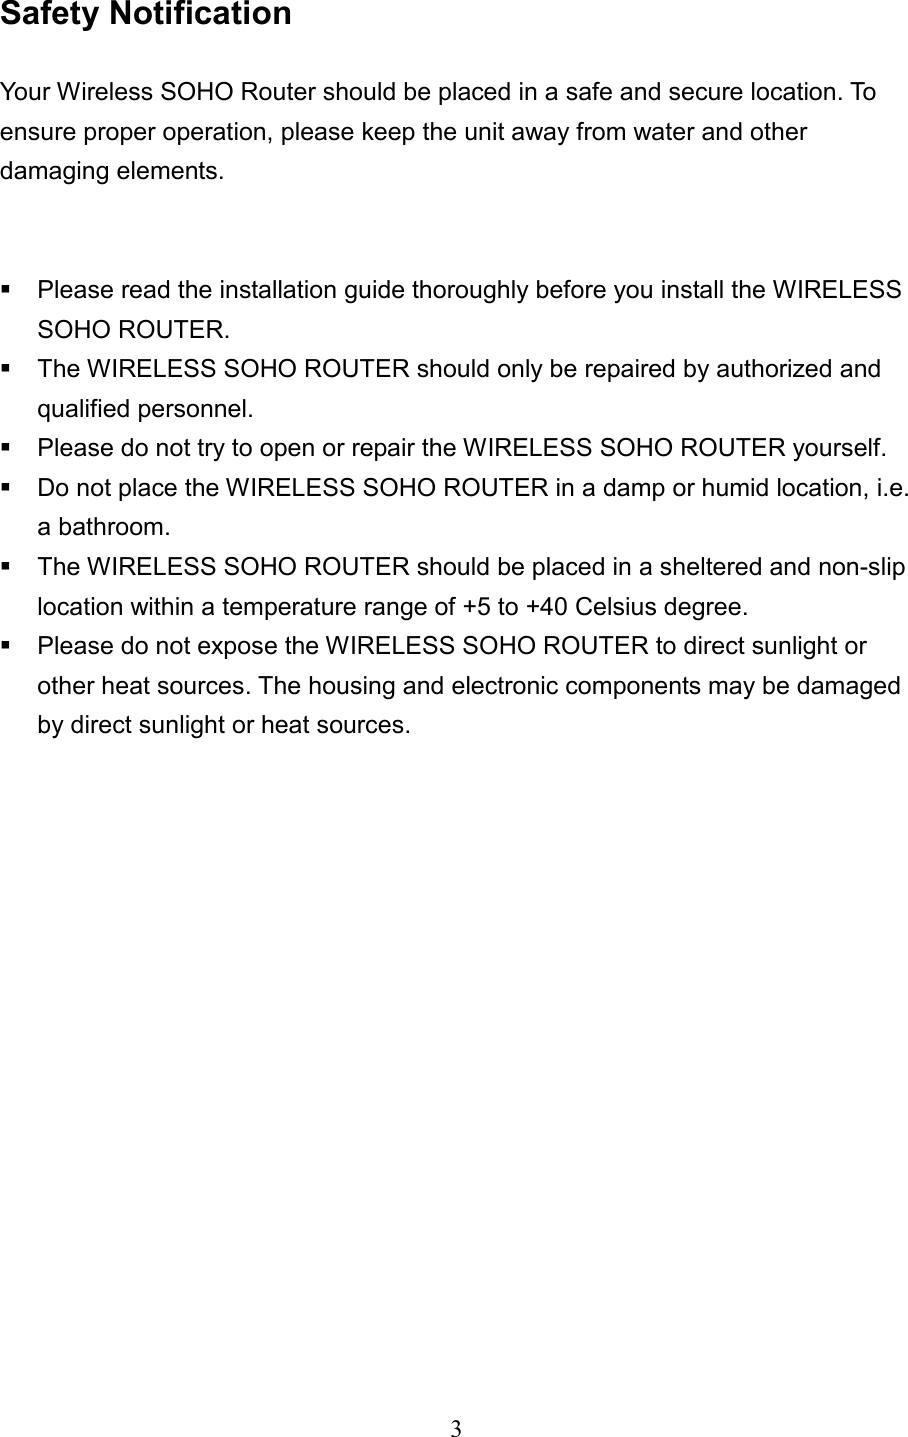  3 Safety Notification    Your Wireless SOHO Router should be placed in a safe and secure location. To ensure proper operation, please keep the unit away from water and other damaging elements.      Please read the installation guide thoroughly before you install the WIRELESS SOHO ROUTER.    The WIRELESS SOHO ROUTER should only be repaired by authorized and qualified personnel.  Please do not try to open or repair the WIRELESS SOHO ROUTER yourself.  Do not place the WIRELESS SOHO ROUTER in a damp or humid location, i.e. a bathroom.  The WIRELESS SOHO ROUTER should be placed in a sheltered and non-slip location within a temperature range of +5 to +40 Celsius degree.  Please do not expose the WIRELESS SOHO ROUTER to direct sunlight or other heat sources. The housing and electronic components may be damaged by direct sunlight or heat sources.         